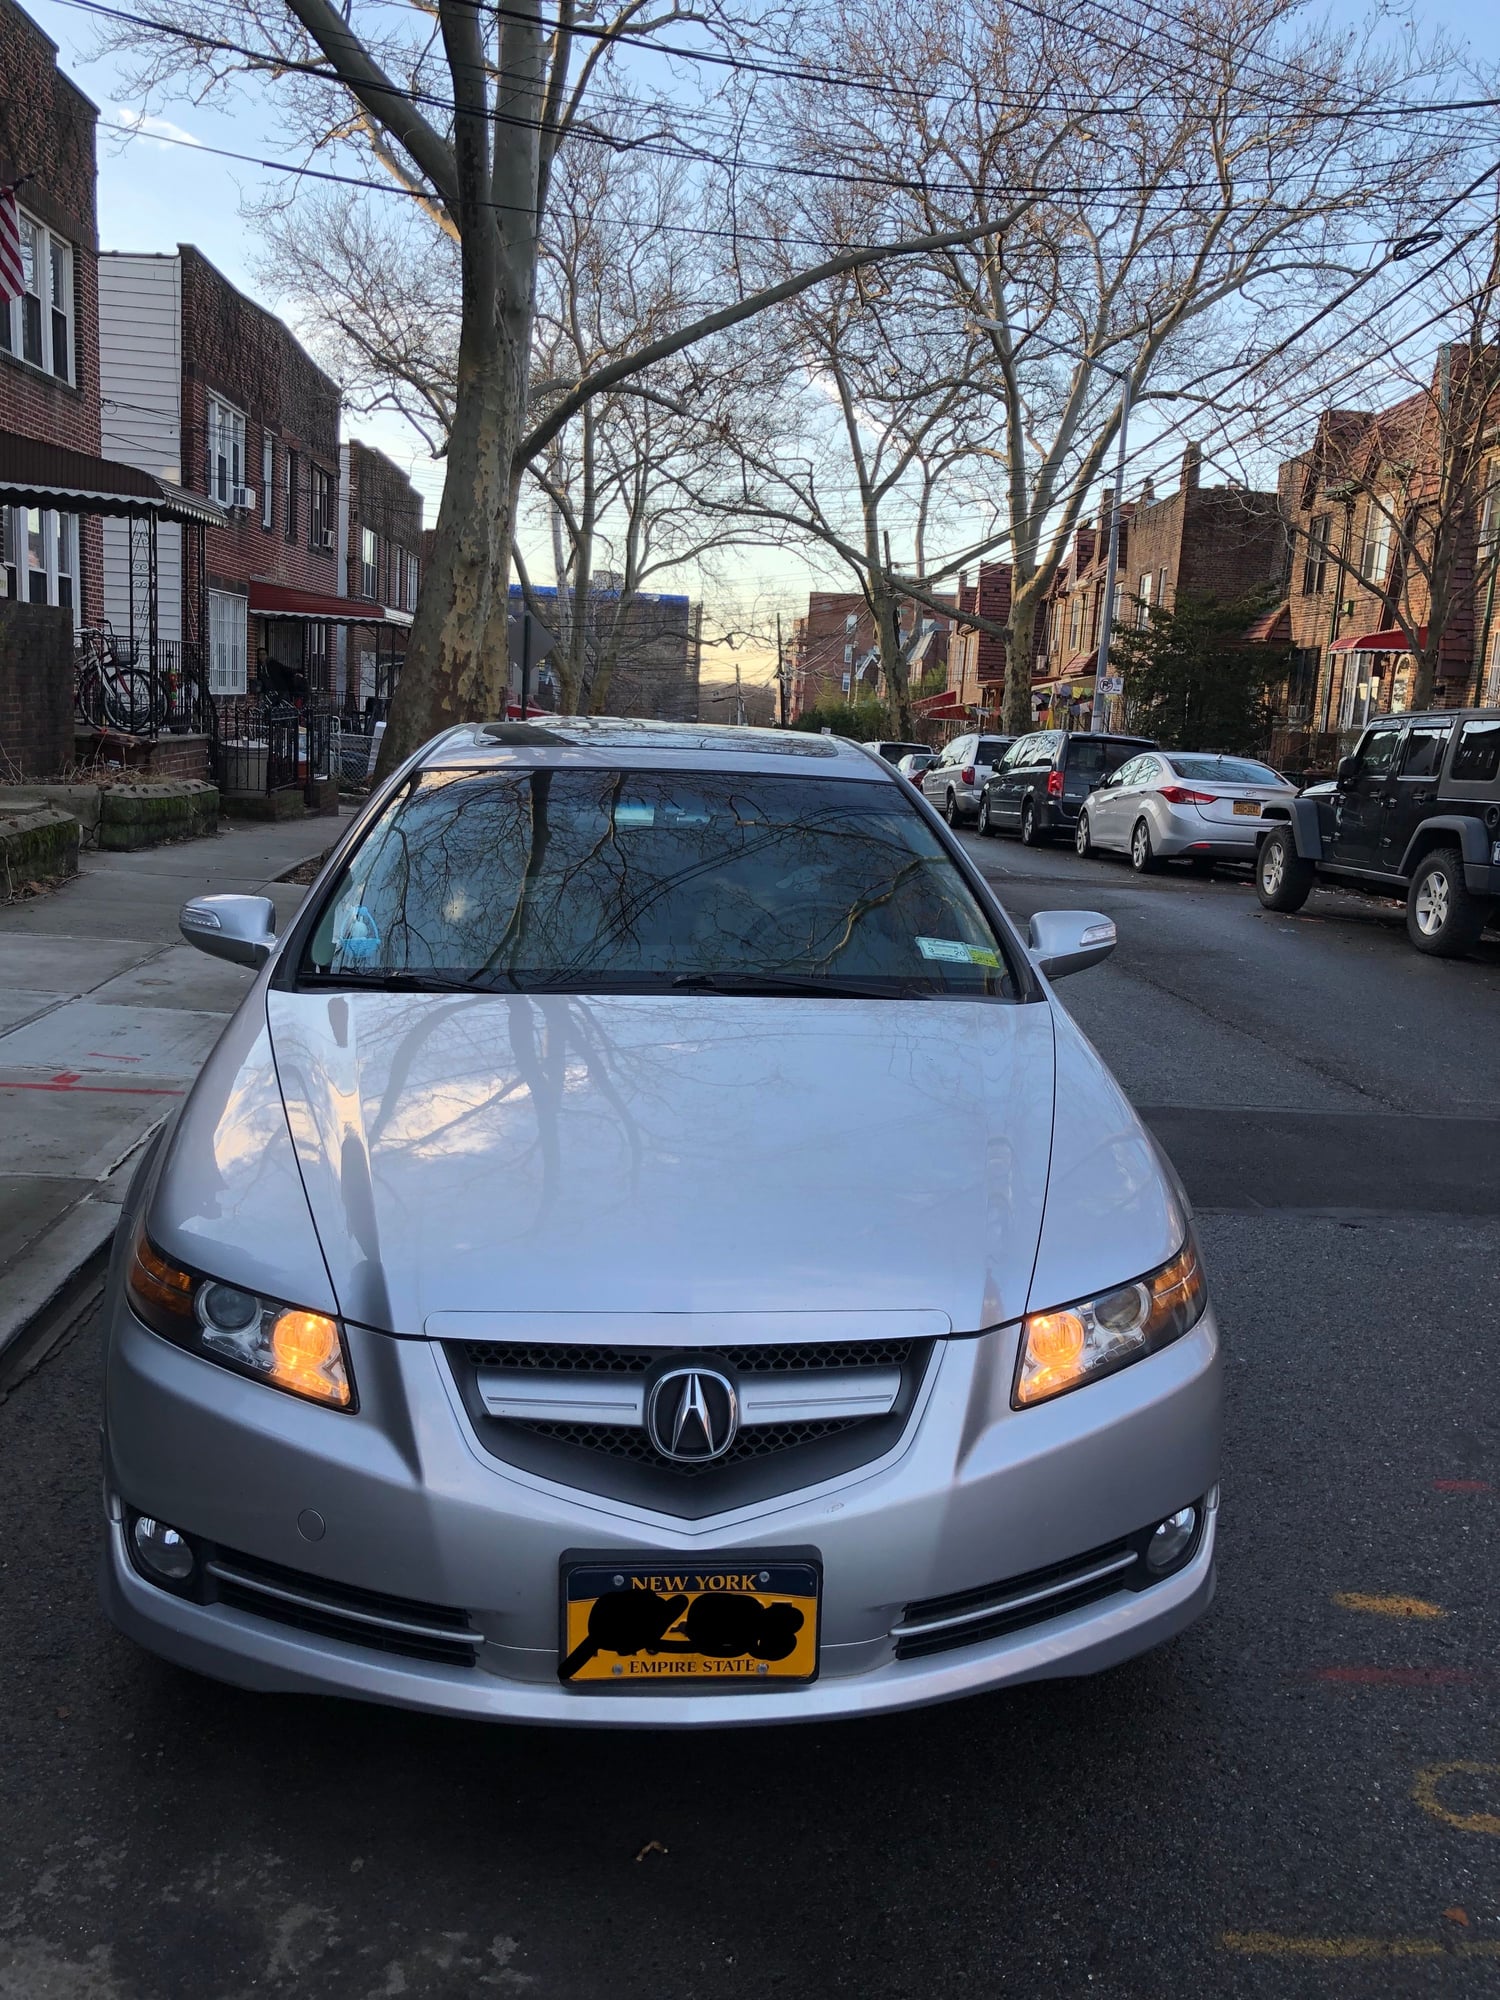 2008 Acura TL - SOLD: NY - 2008 Acura TL Base TL - Clean title - 49,482 miles - Used - VIN 19UUA66288A051263 - 49,482 Miles - 6 cyl - 2WD - Automatic - Sedan - Silver - Queens, NY 11372, United States